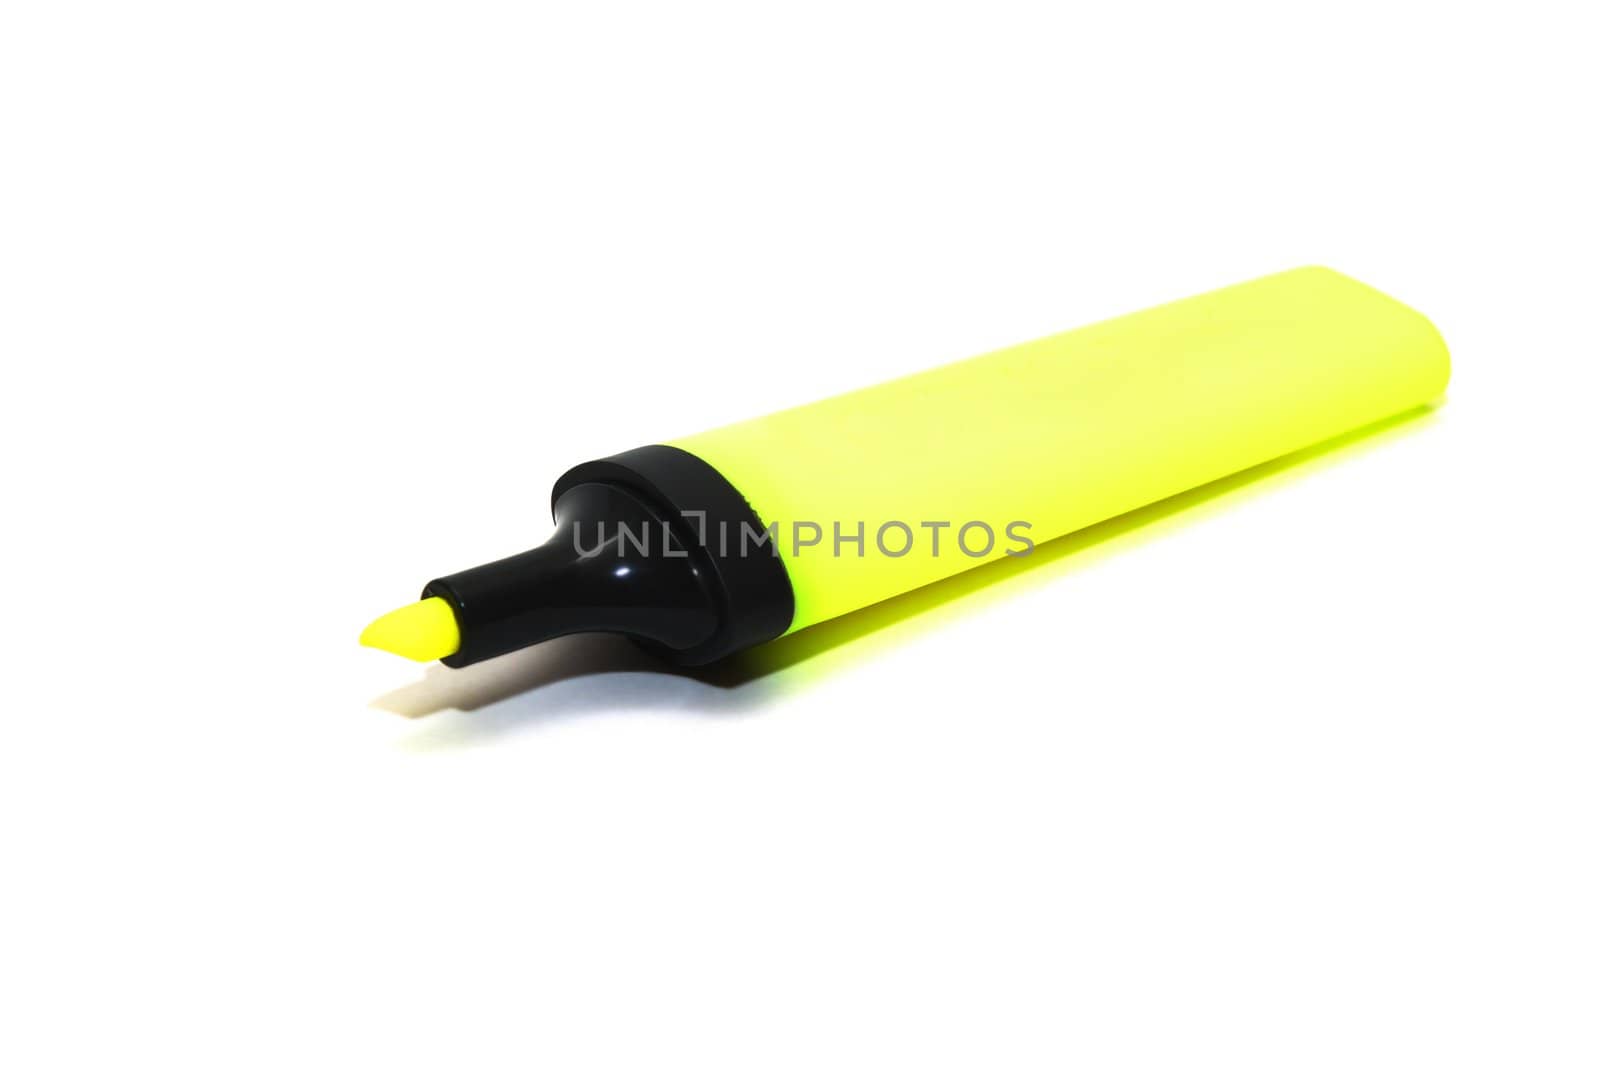 photo of the yellow marker on white background